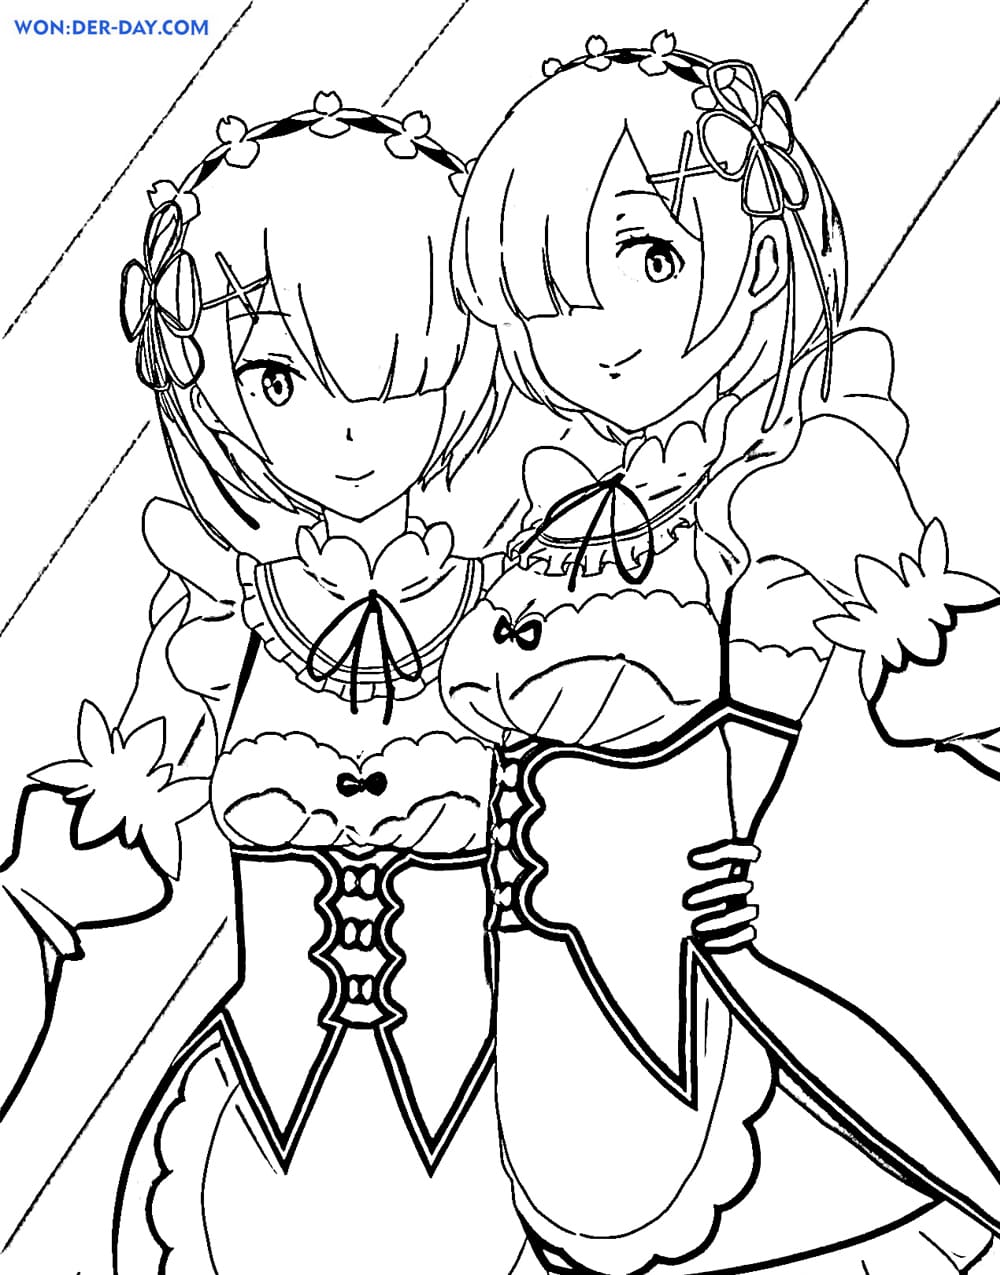 Re:Zero Coloring Pages - 80 Free Printable coloring pages